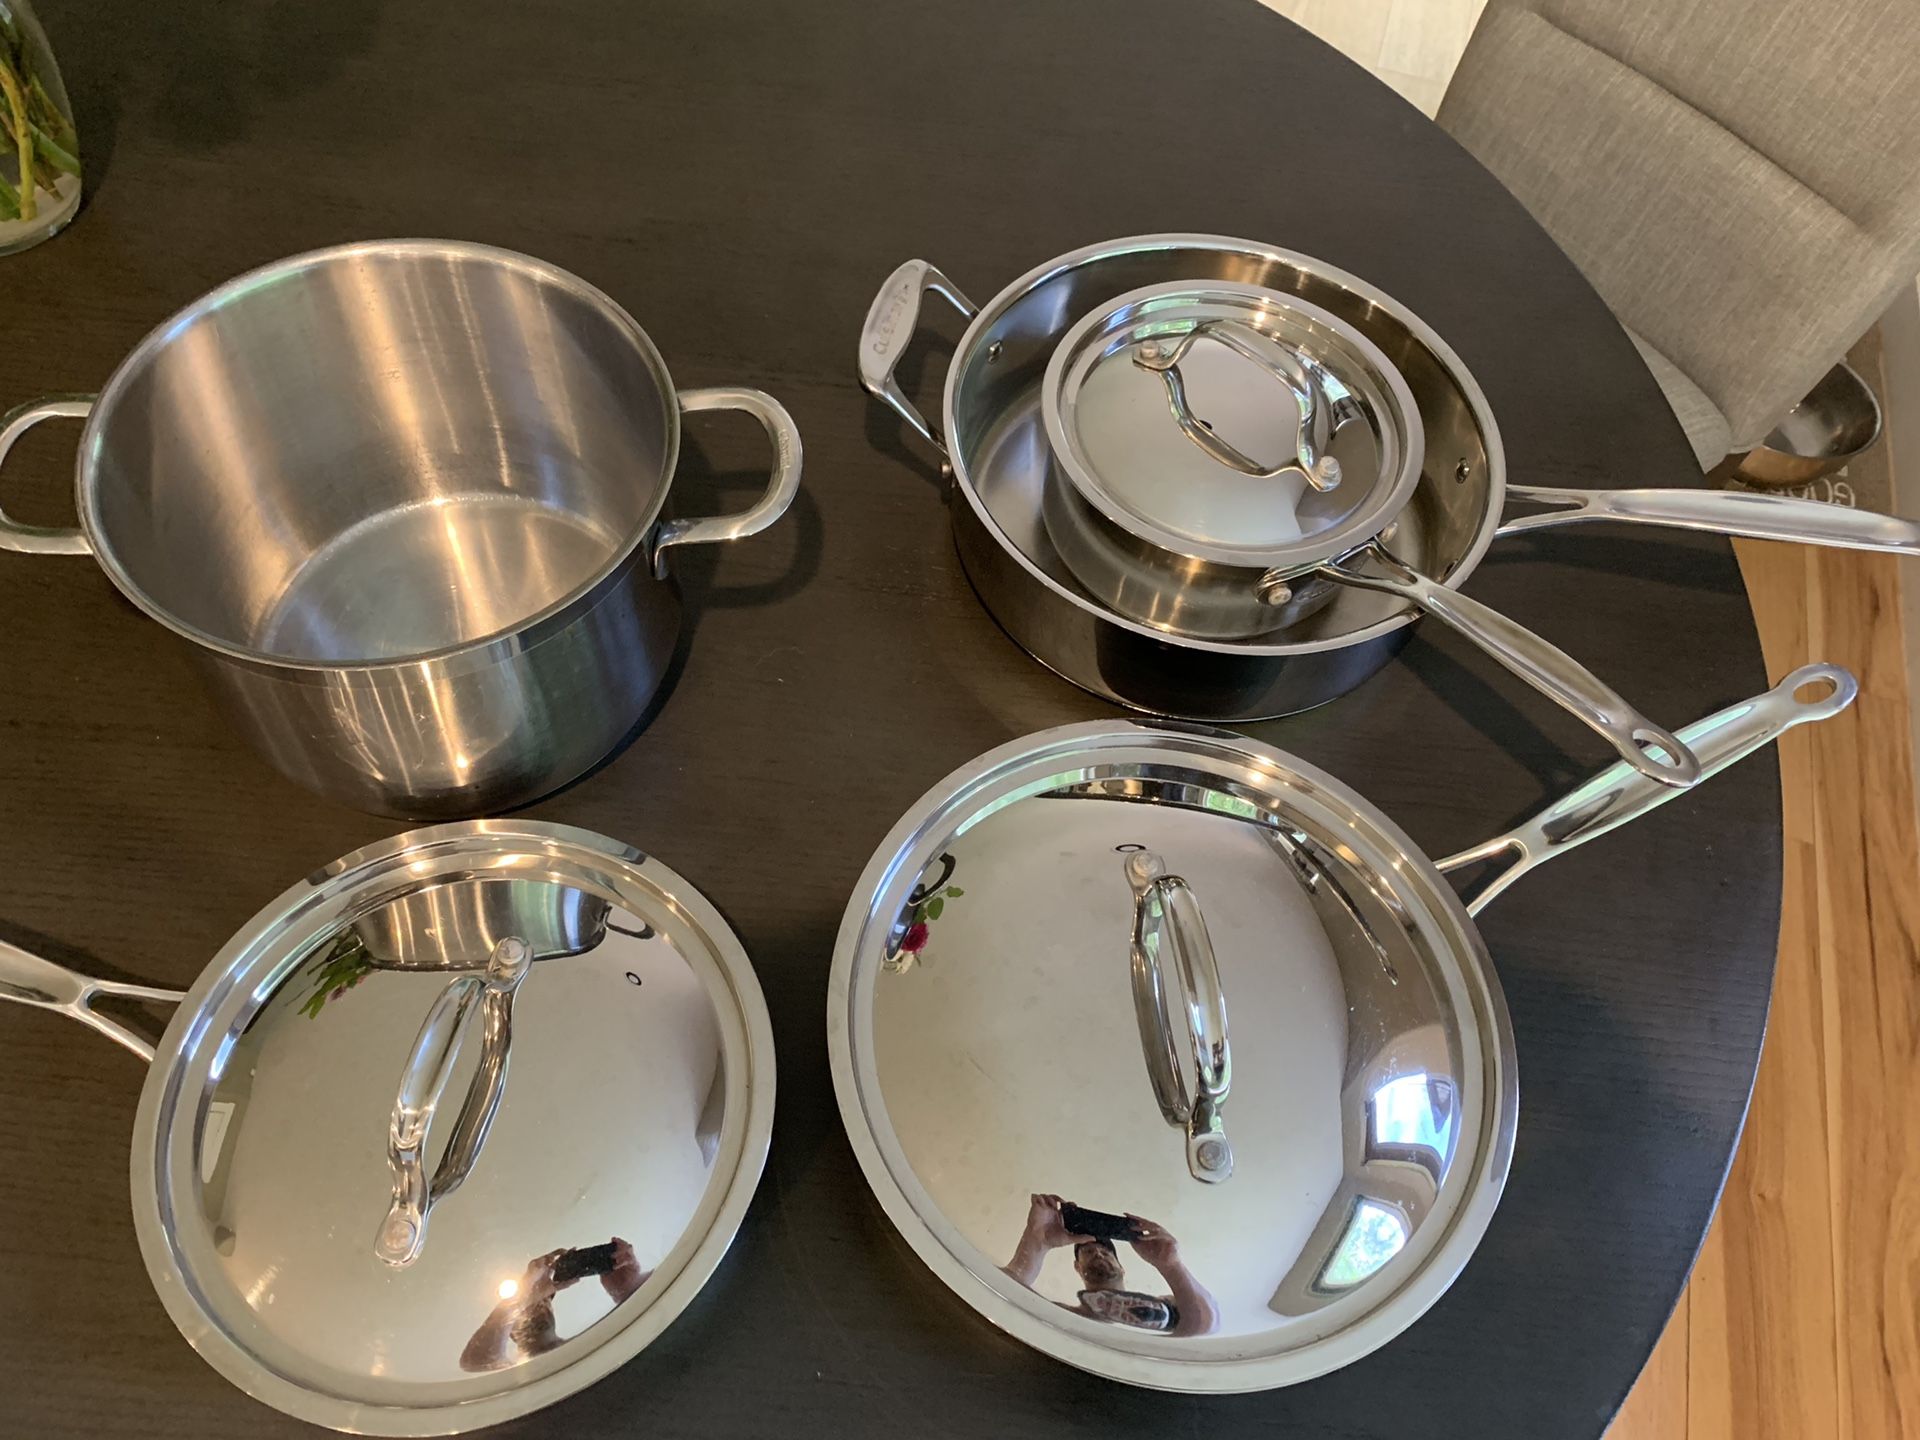 Cuisinart stainless steel cooking pans set